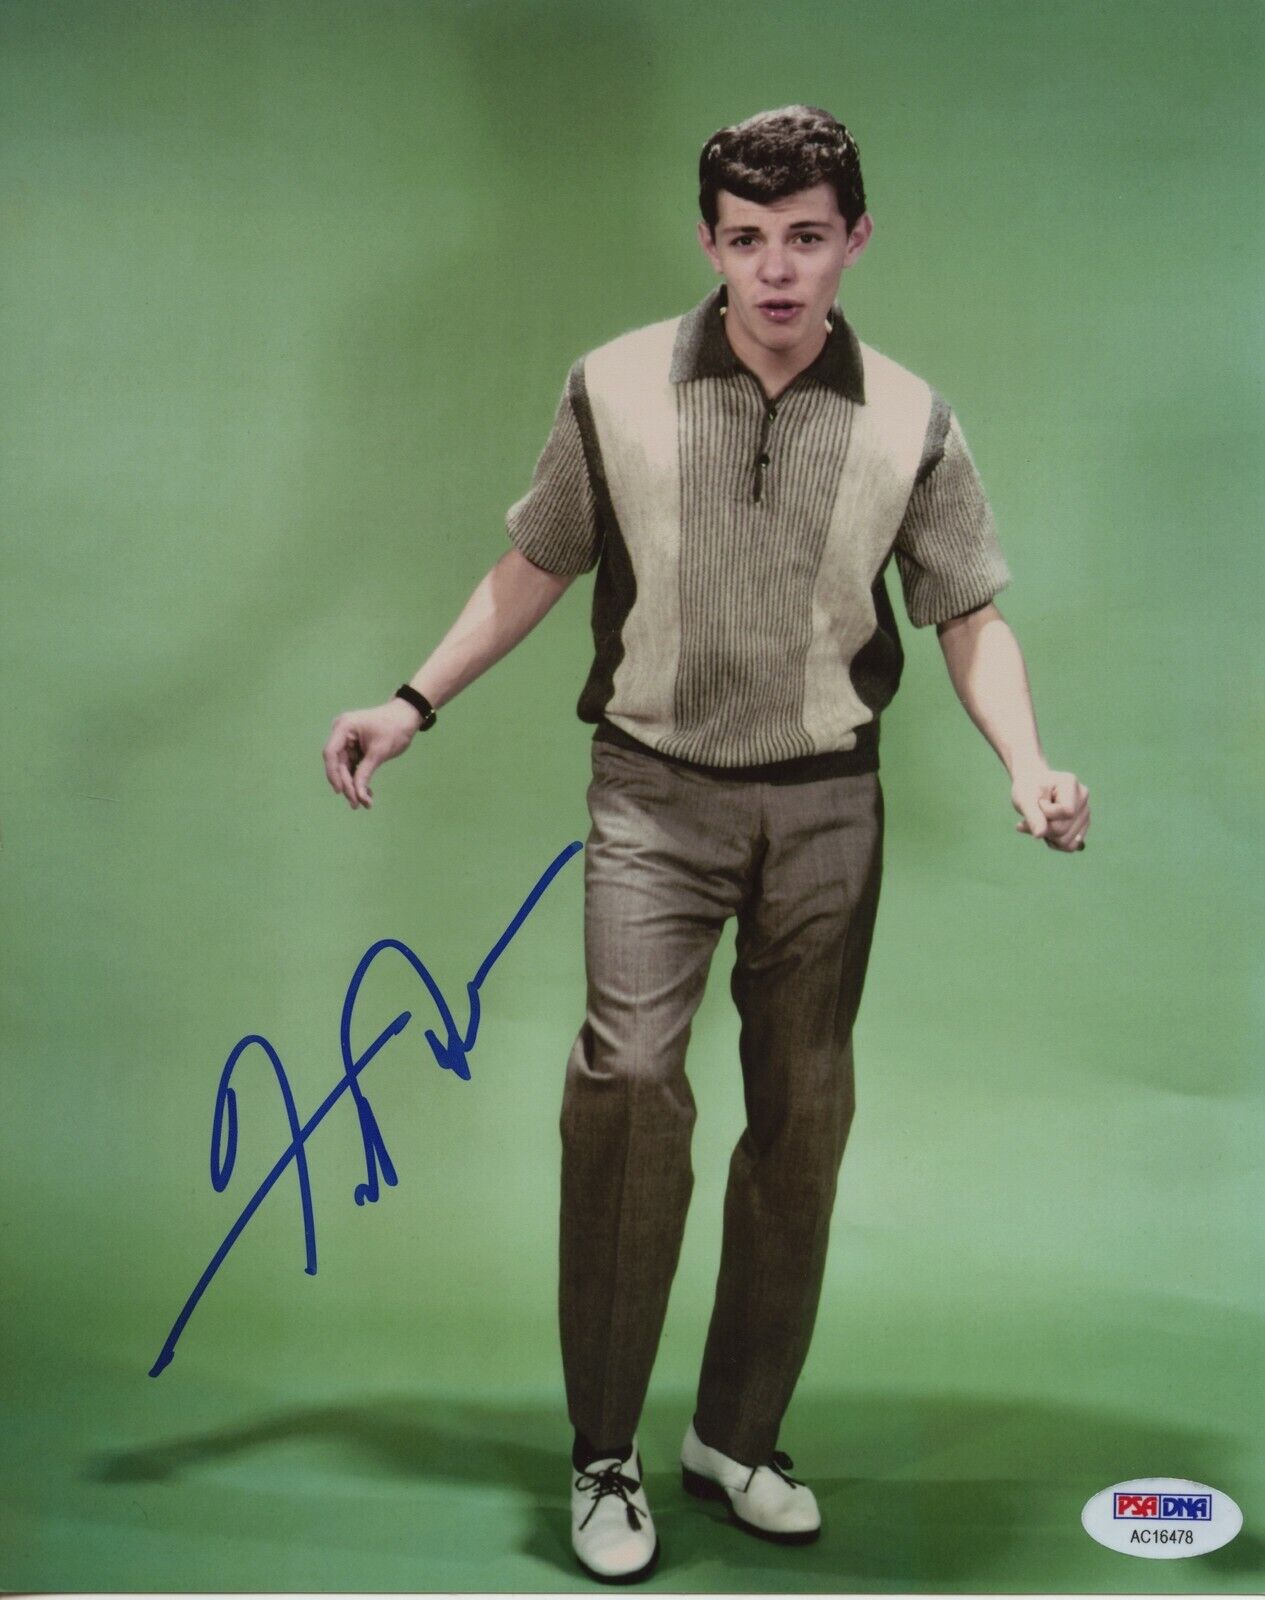 FRANKIE AVALON 8x10 Photo Poster painting Signed Autographed Auto PSA DNA Beach Party